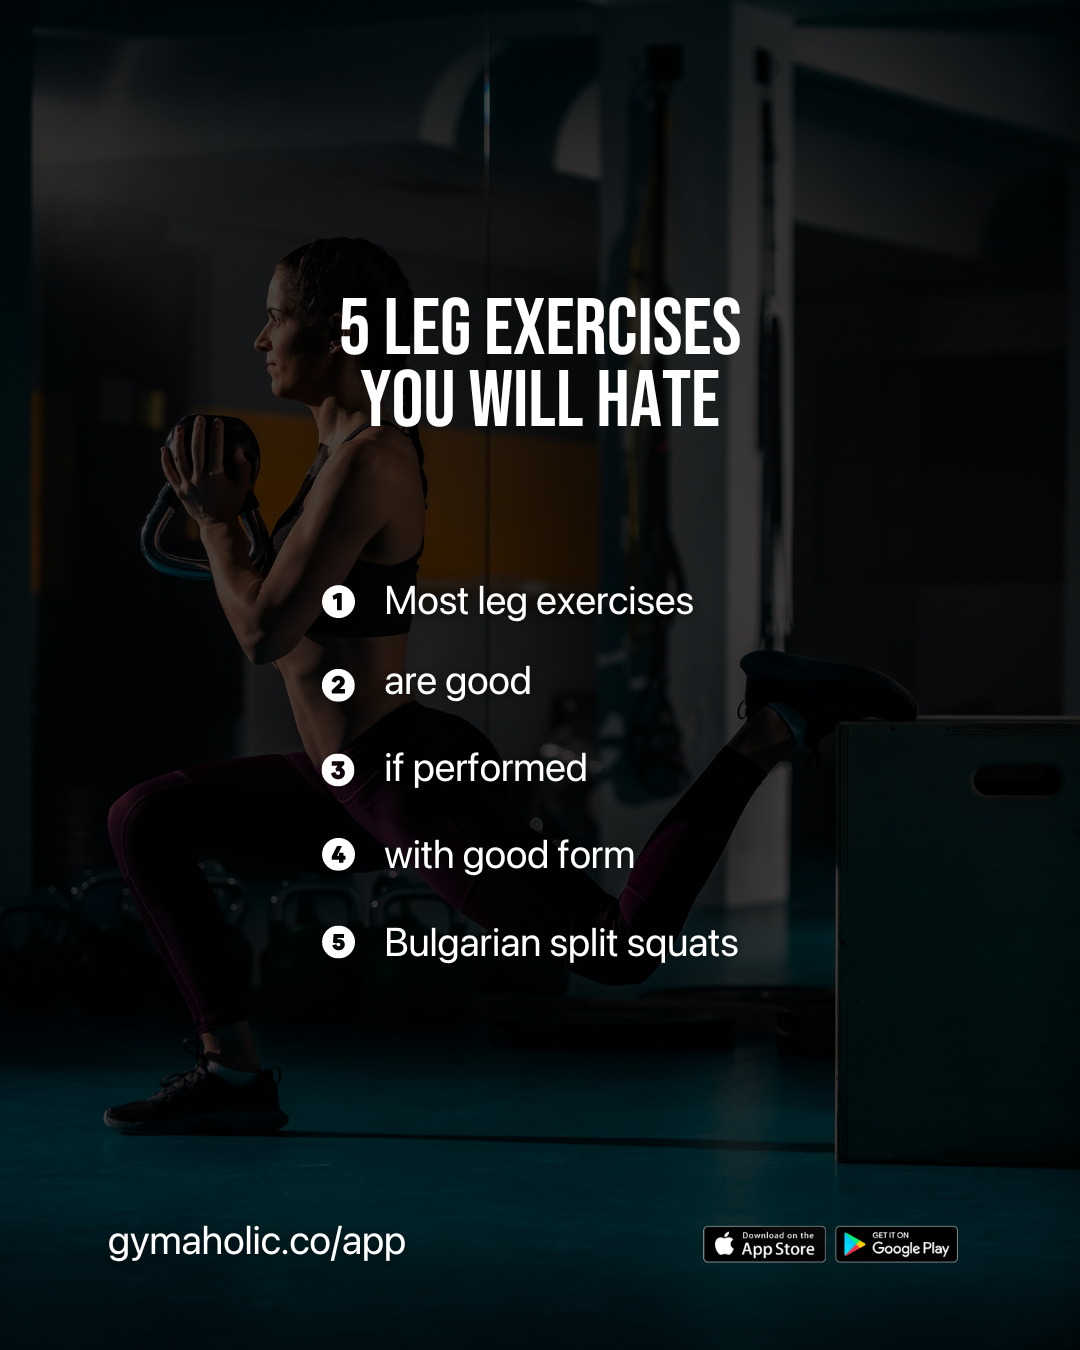 5 Leg Exercises You Will Hate